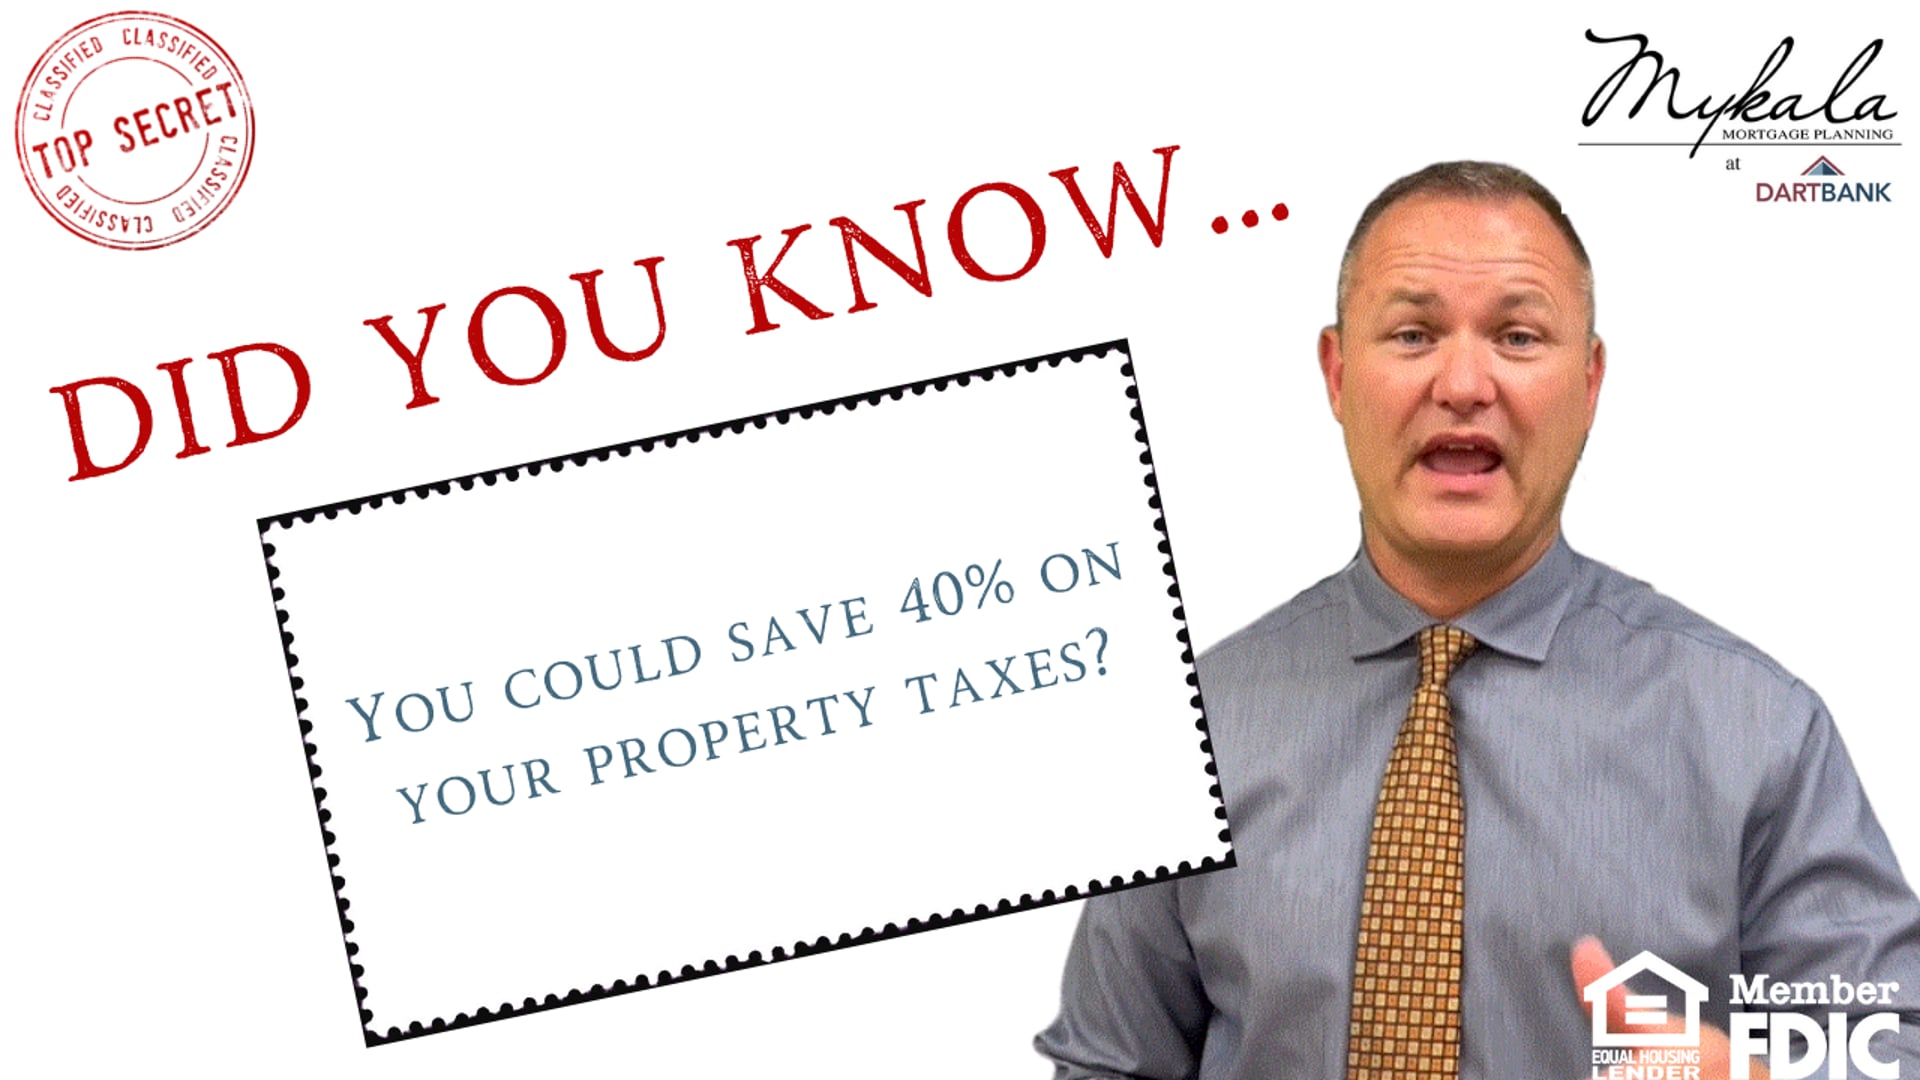 You Could Save 40% On Your Property Taxes